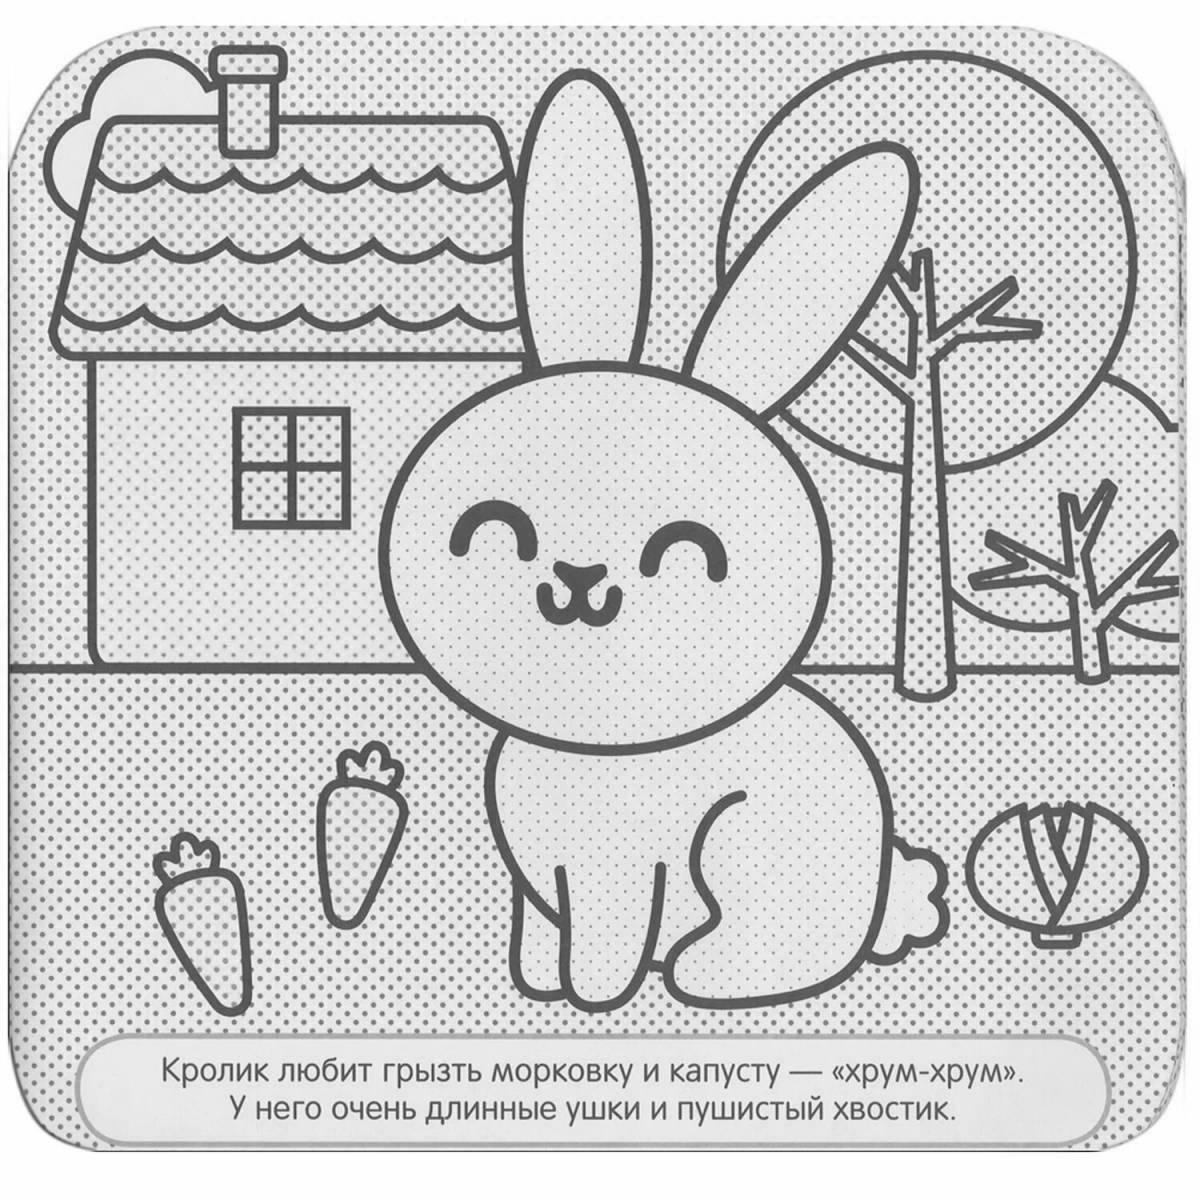 Internet store of bright coloring pages